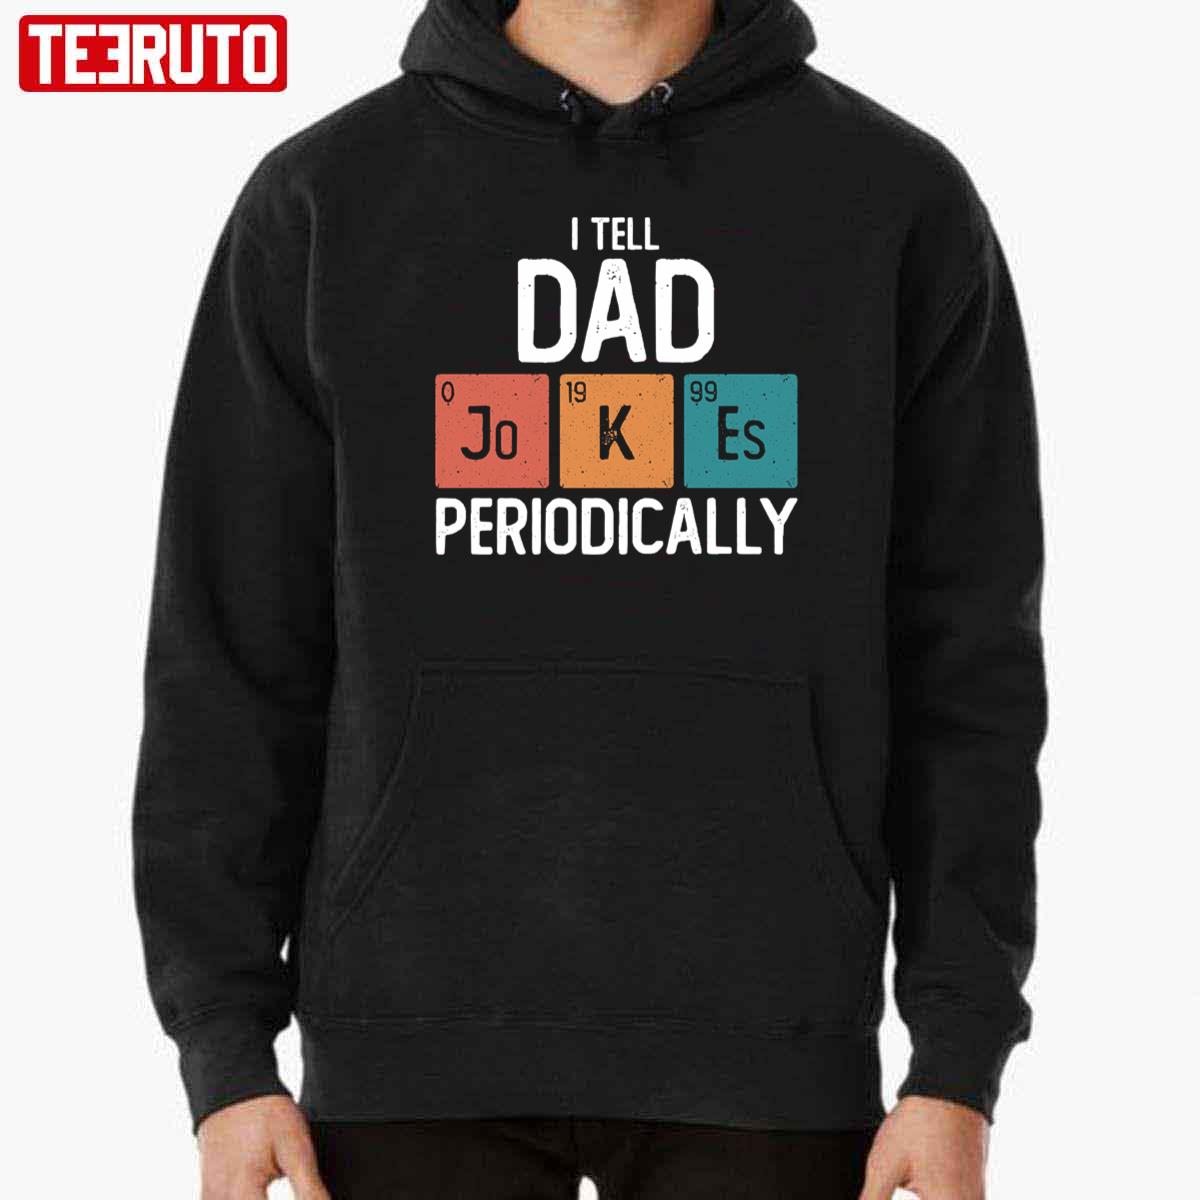 I Tell Dad Jokes Periodically Science Pun Vintage Chemistry Periodical Table Unisex T-Shirt